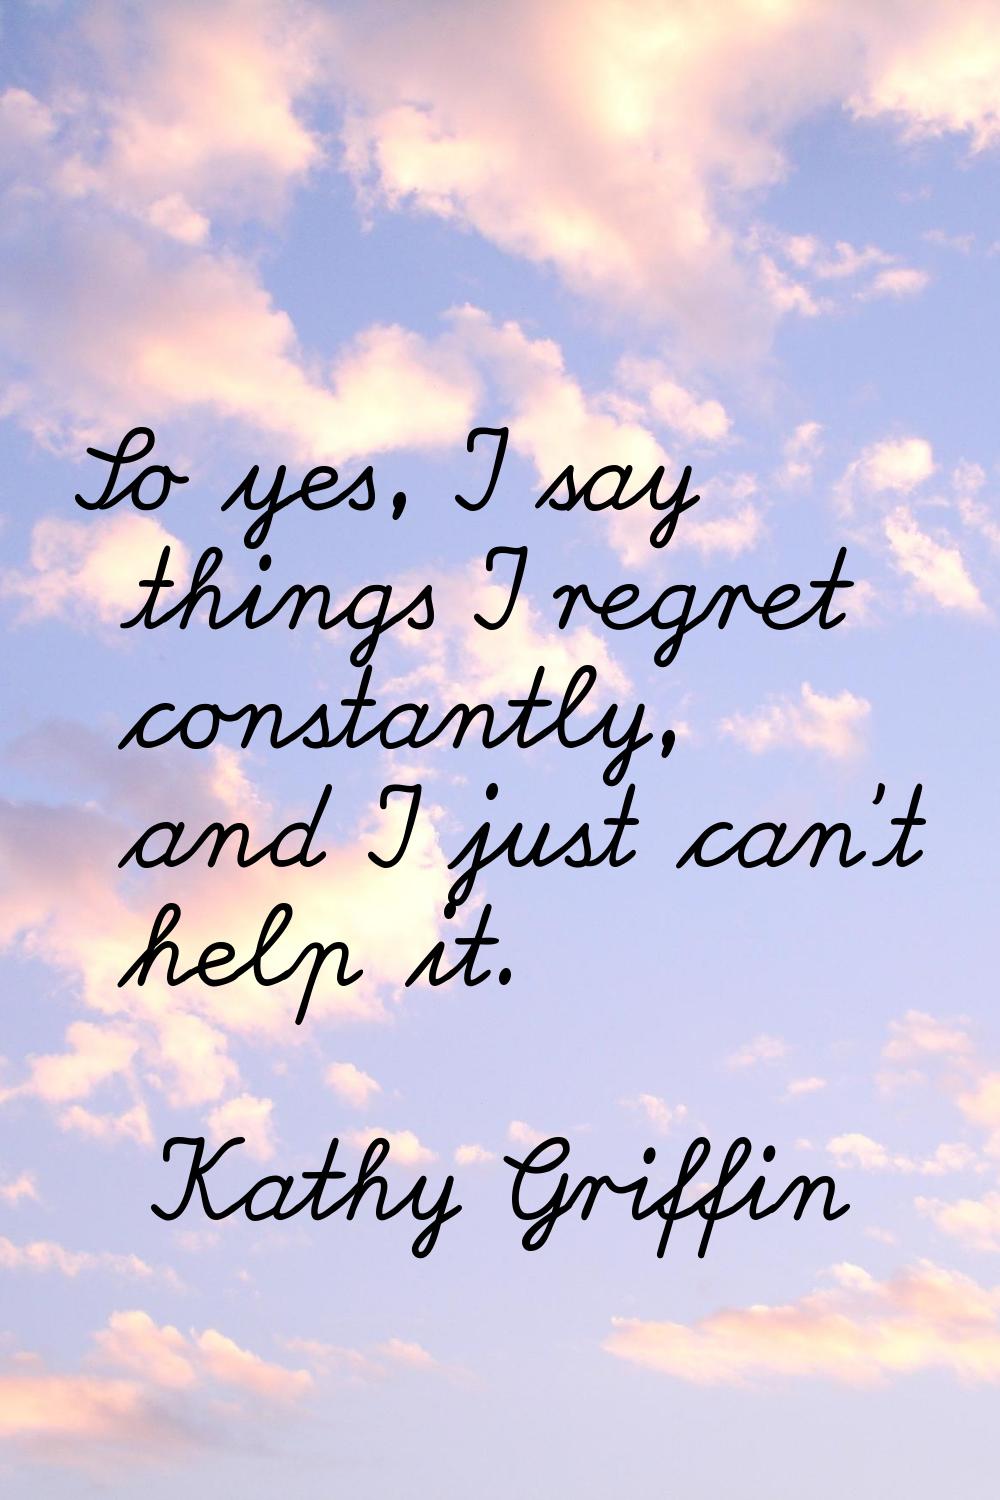 So yes, I say things I regret constantly, and I just can't help it.